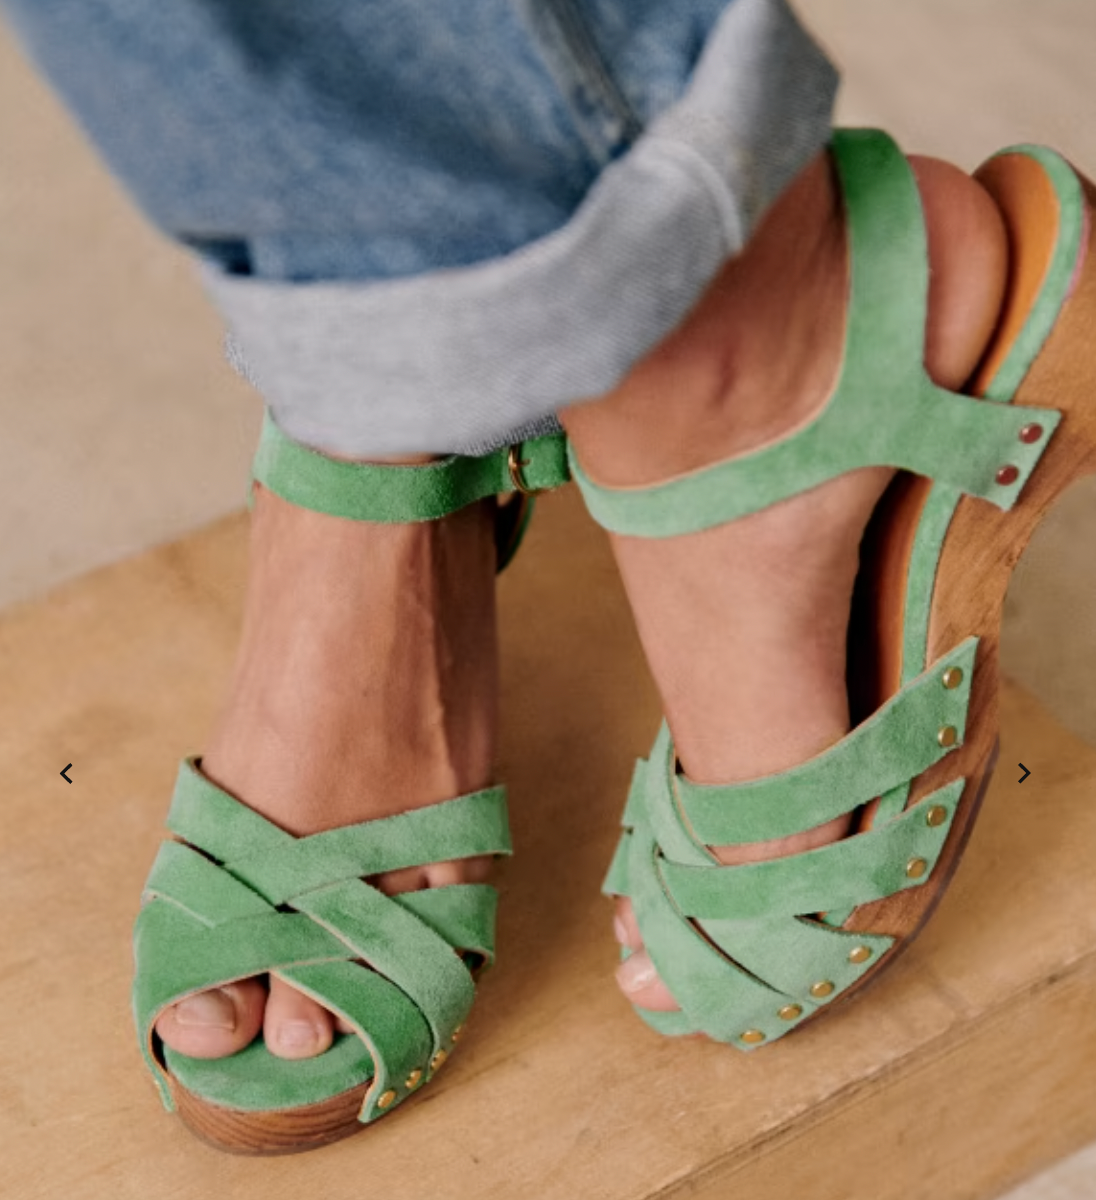 Frida™ | Glamorous sandals with a heel